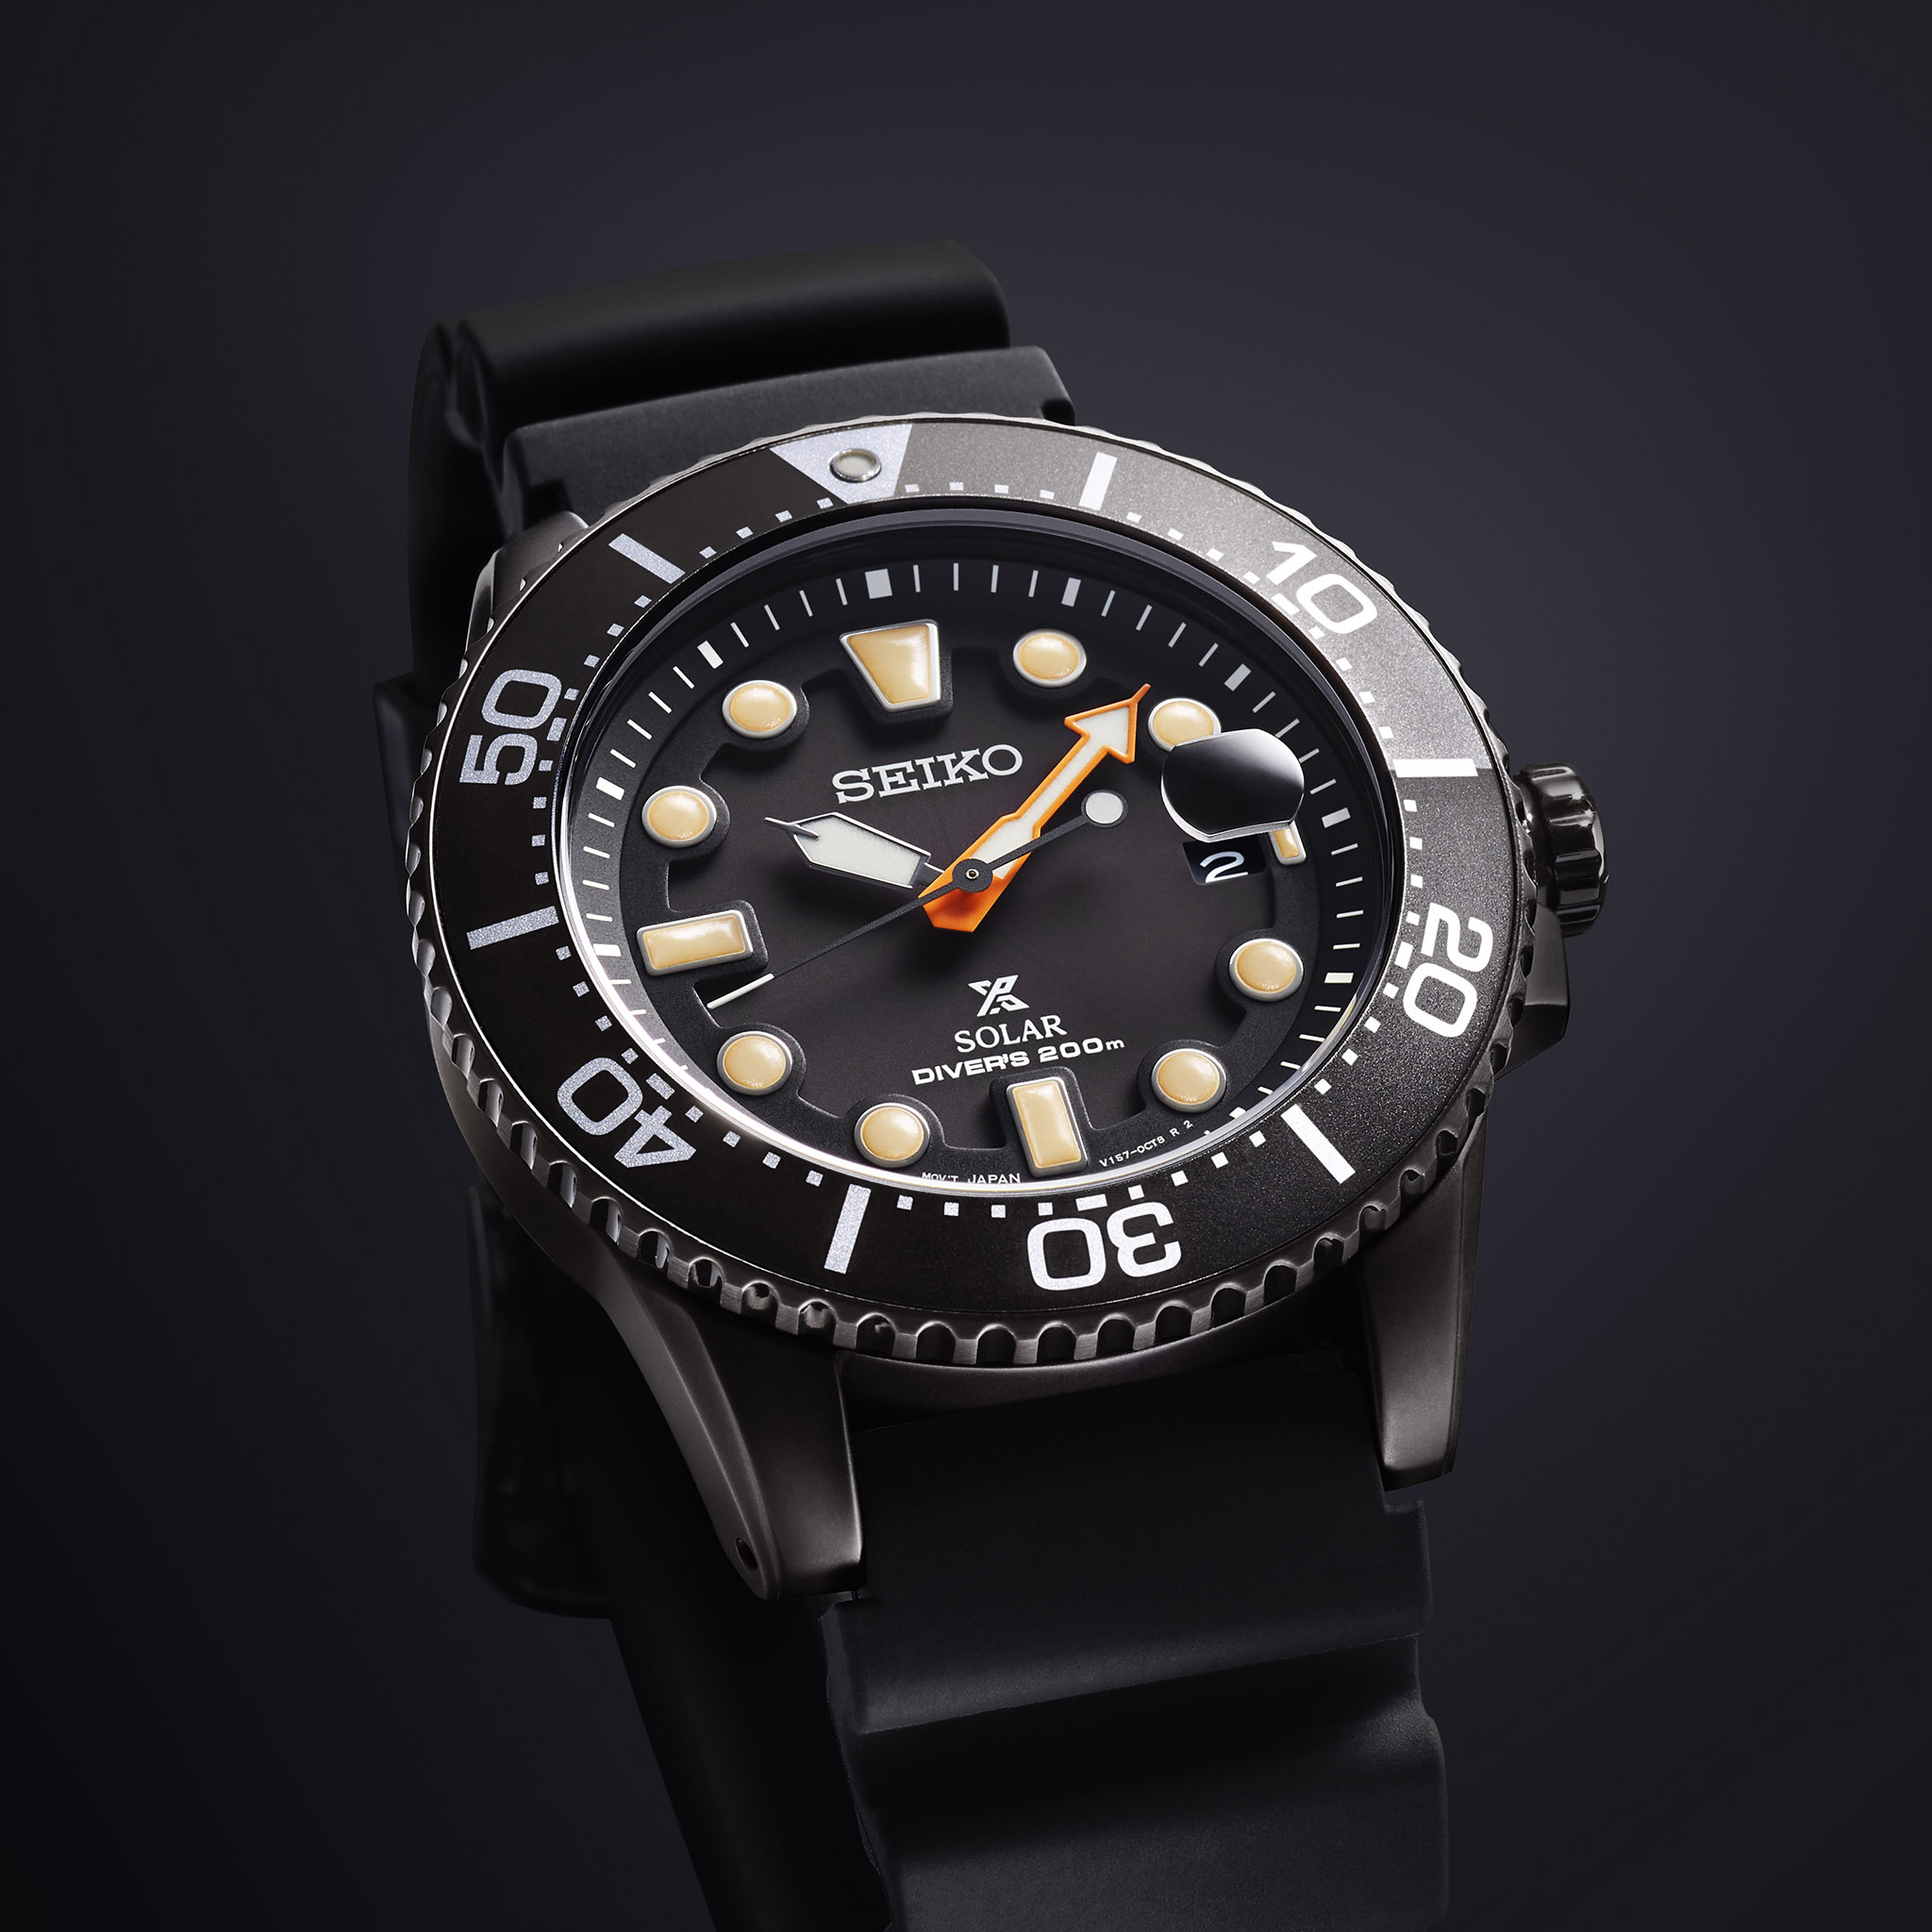 Seiko Inspired By Inky Ocean Depths For Black Series Of Prospex Dive Watches